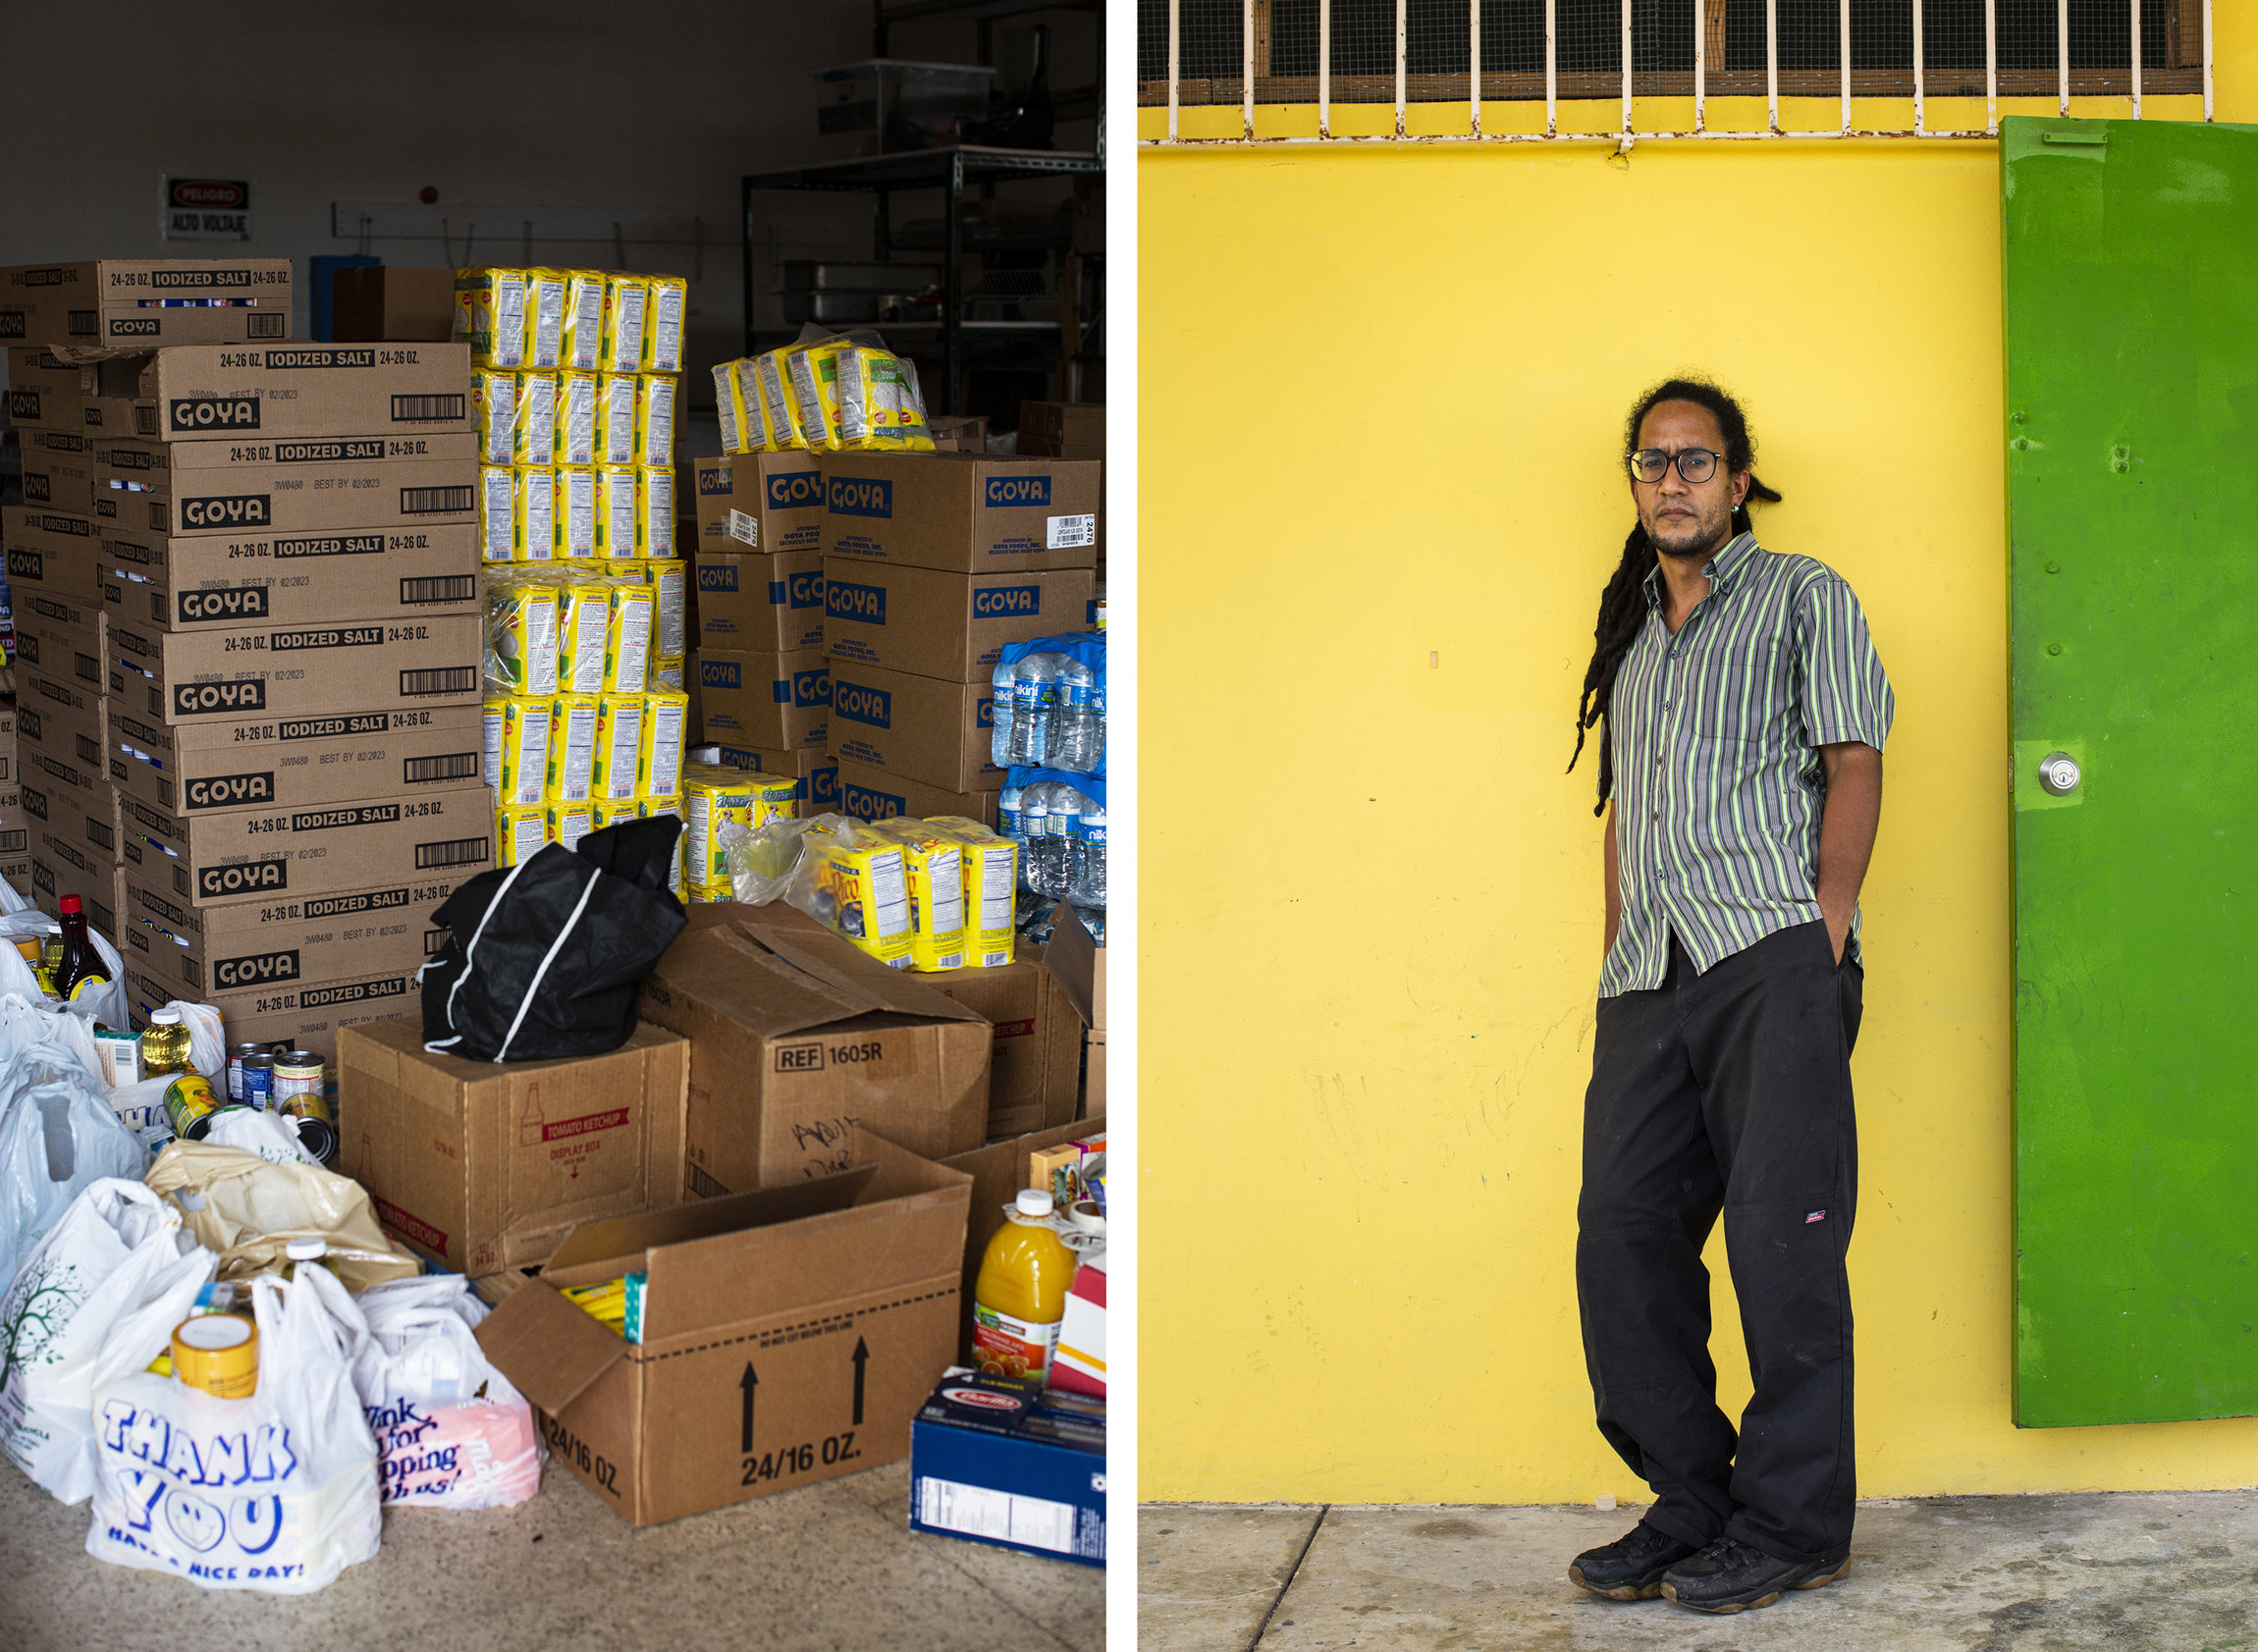 A split image- on the left, boxes and bags of non parishable food items in a storage areas. On the right, Giovanni Roberto leans against a bright yellow wall, with a bright green door next to him.